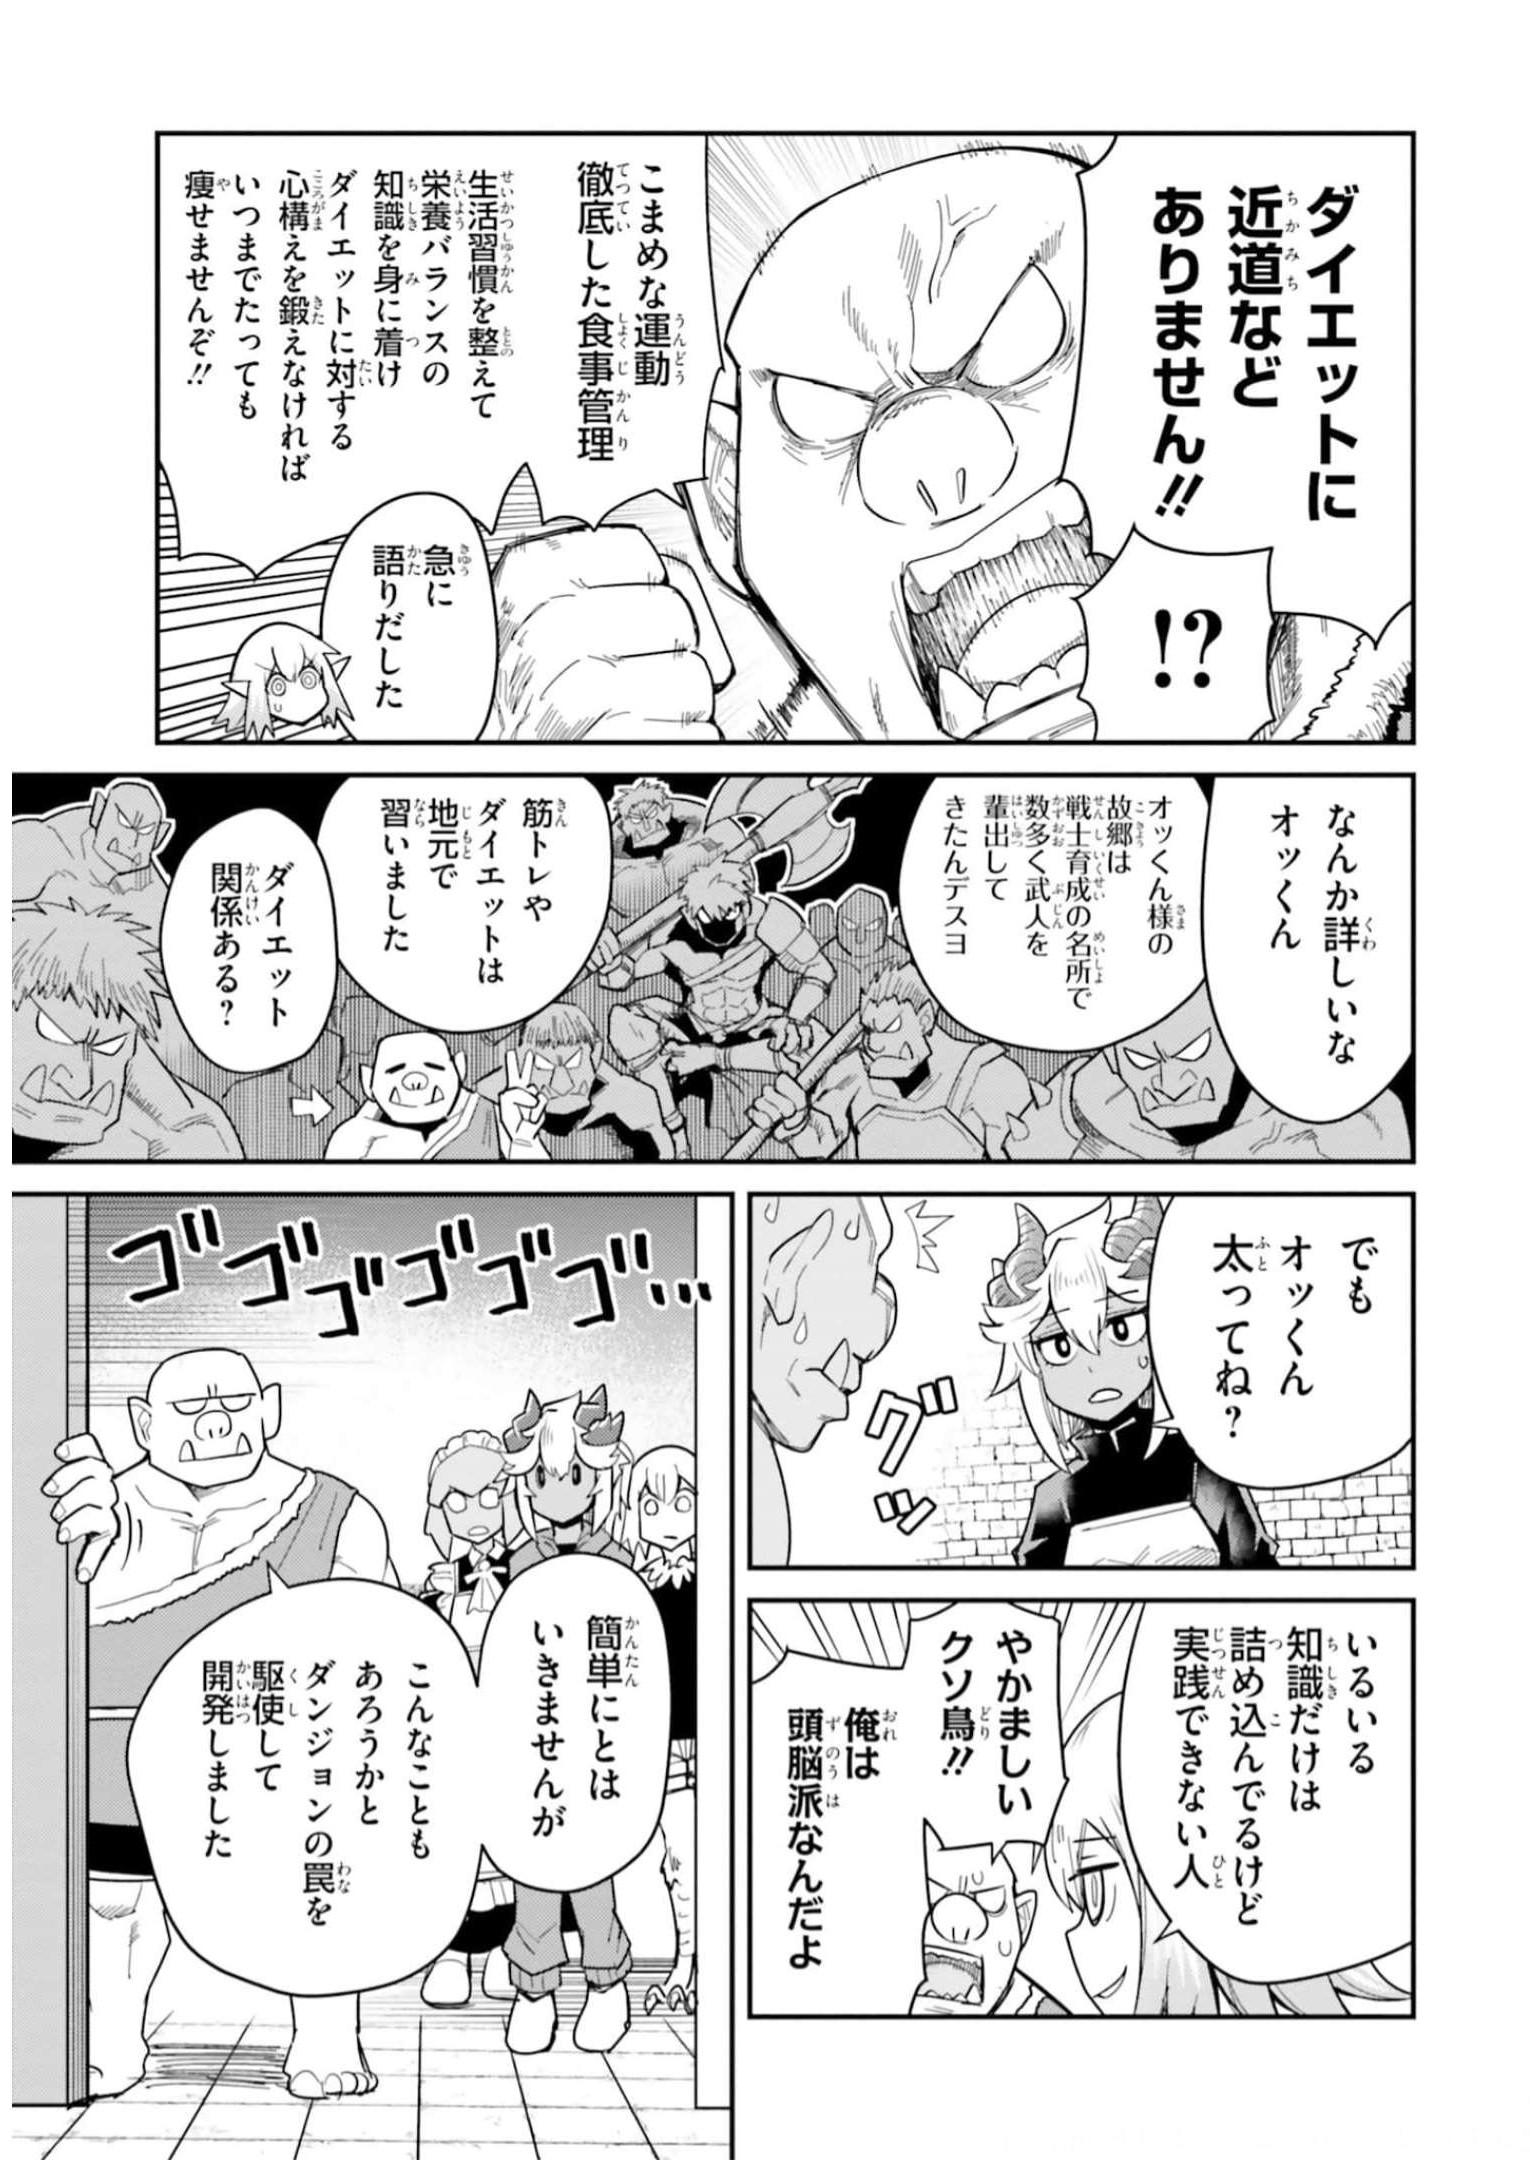 Dungeon Friends Forever Dungeon's Childhood Friend ダンジョンの幼なじみ 第24話 - Page 7